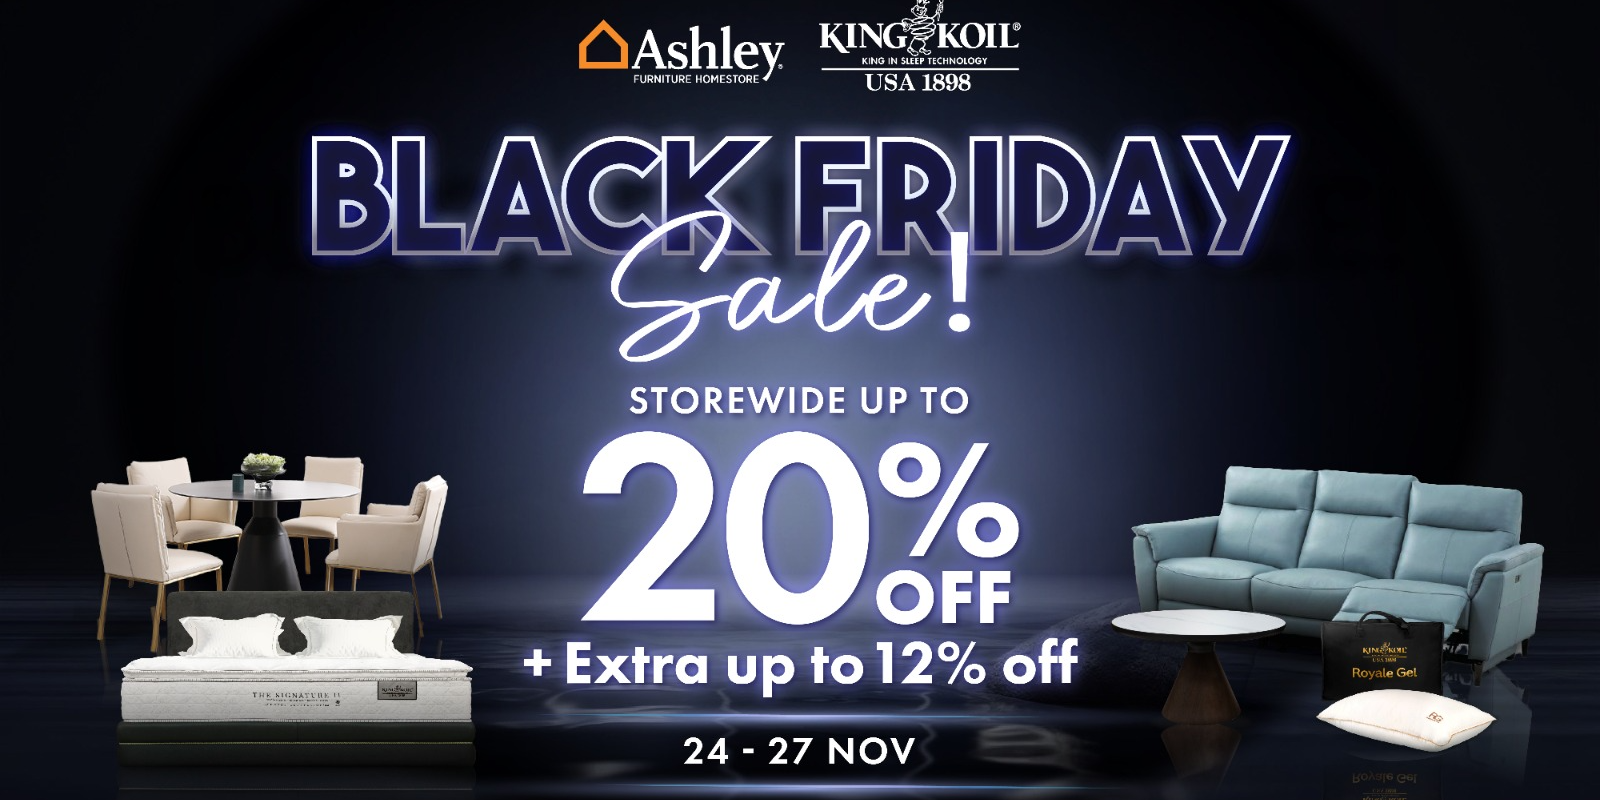 [King Koil Black Friday Sale] Get Storewide Up to 20% OFF + Additional Up to 12% OFF from 24-27 Nov